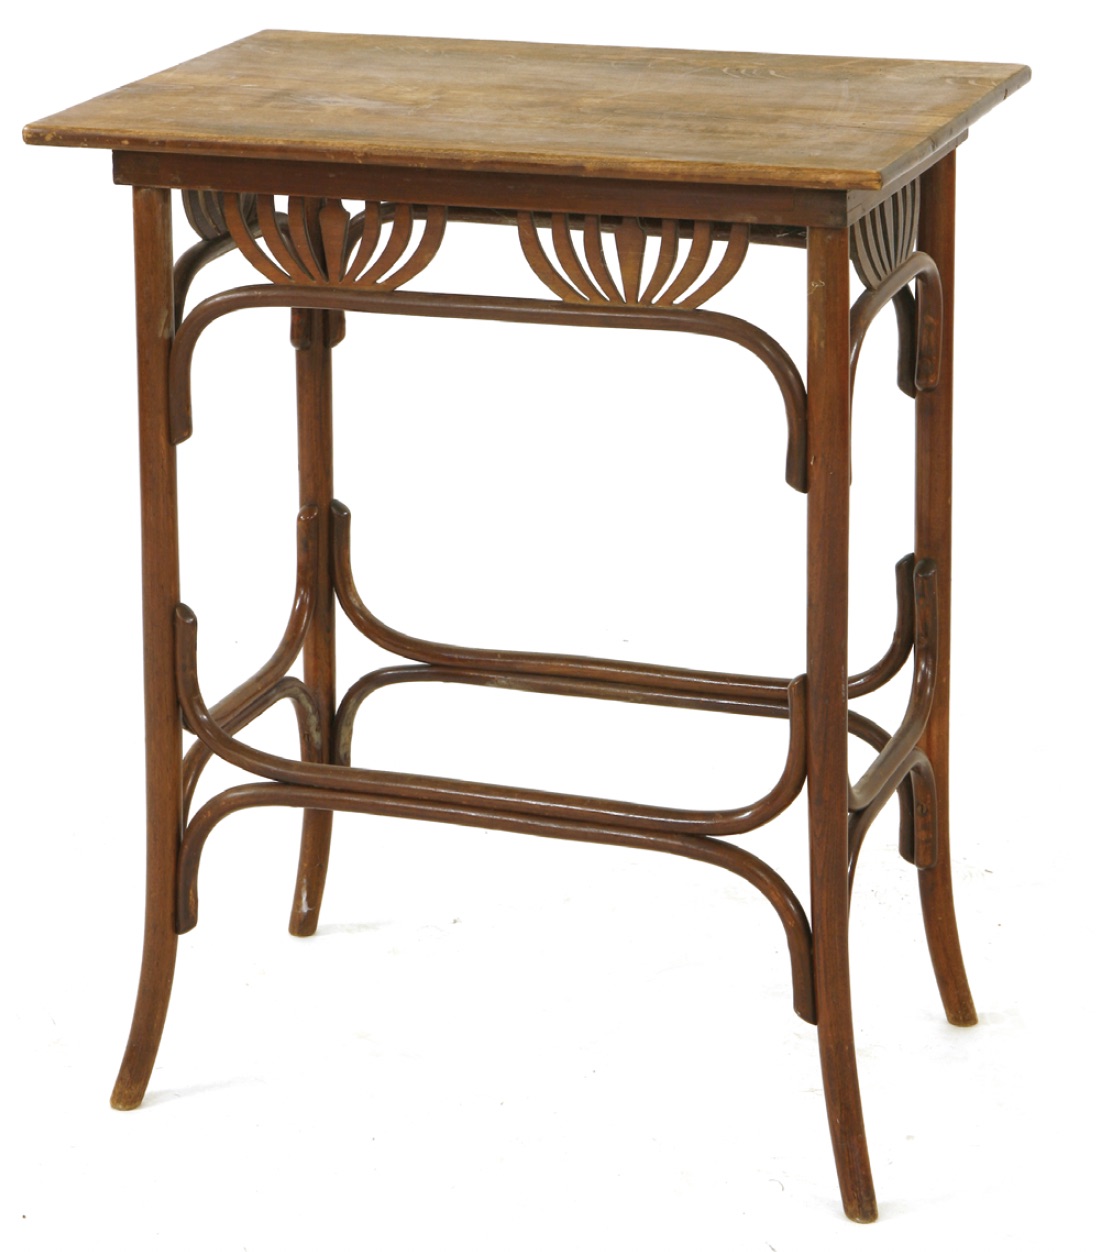 An early 20th-century Thonet bentwood side table